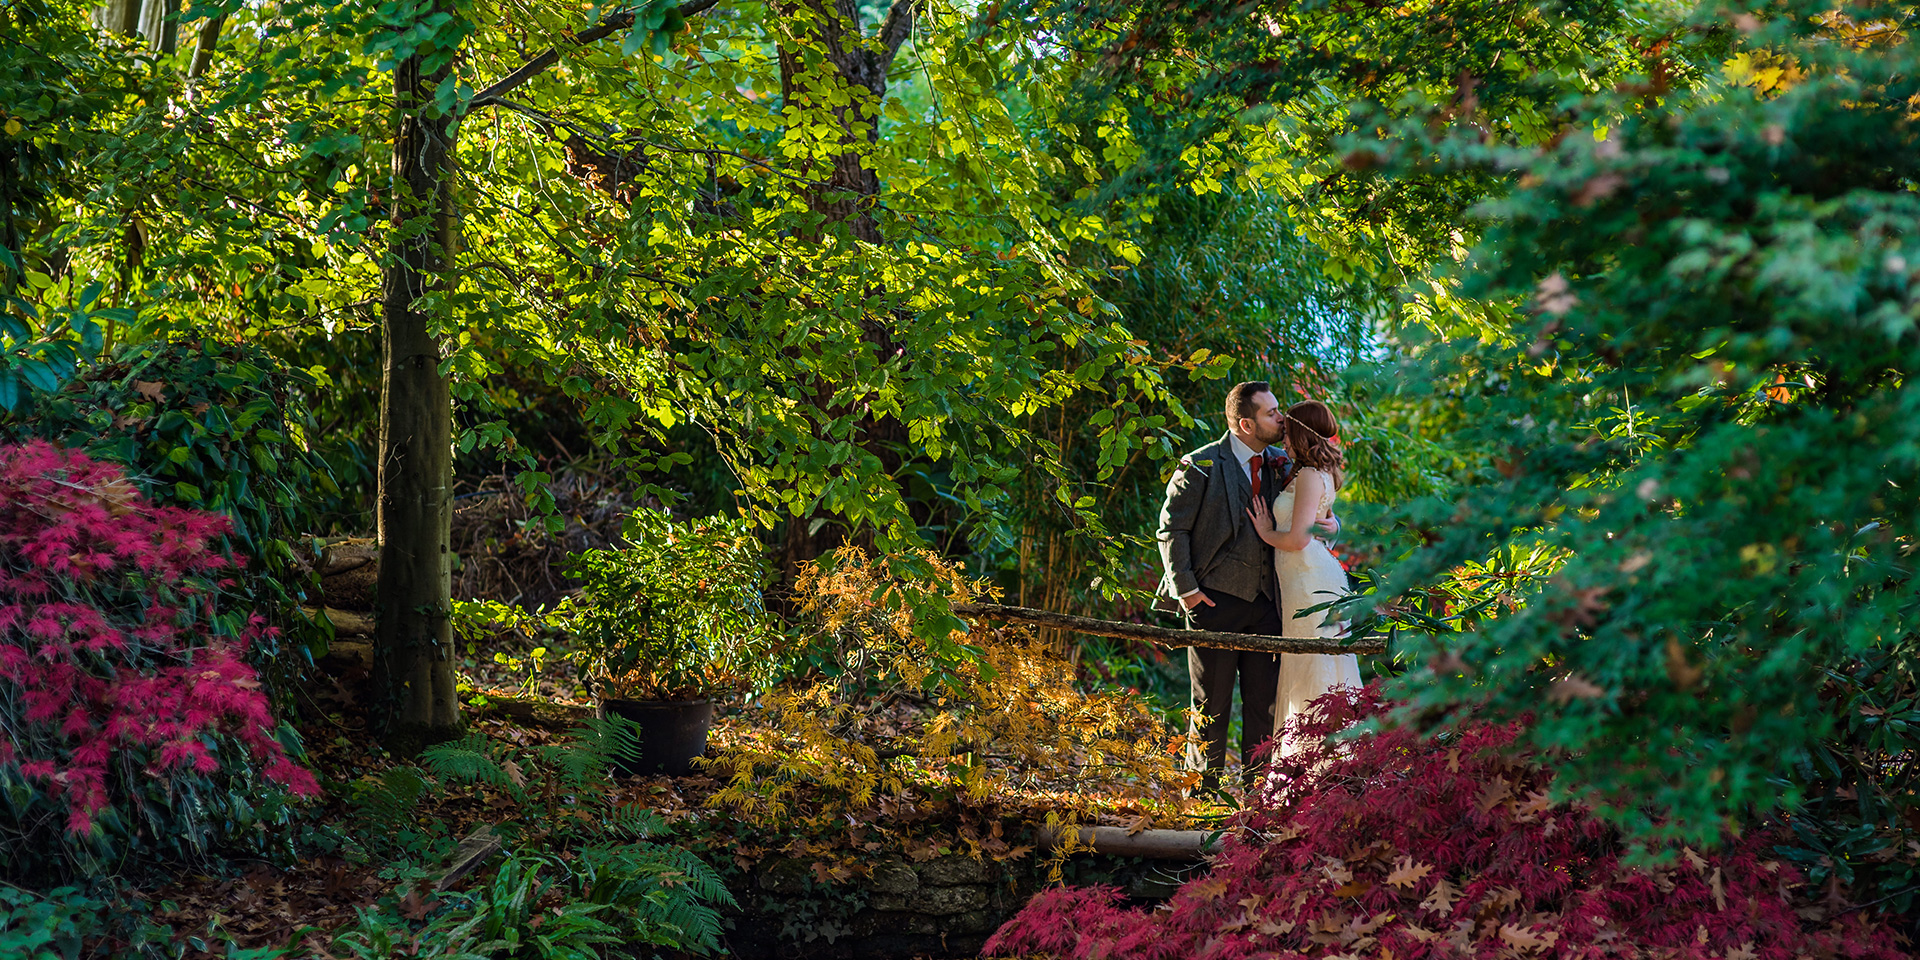 Lisa and Chris chose this beautiful barn wedding venue in Hampshire for their autumnal wedding